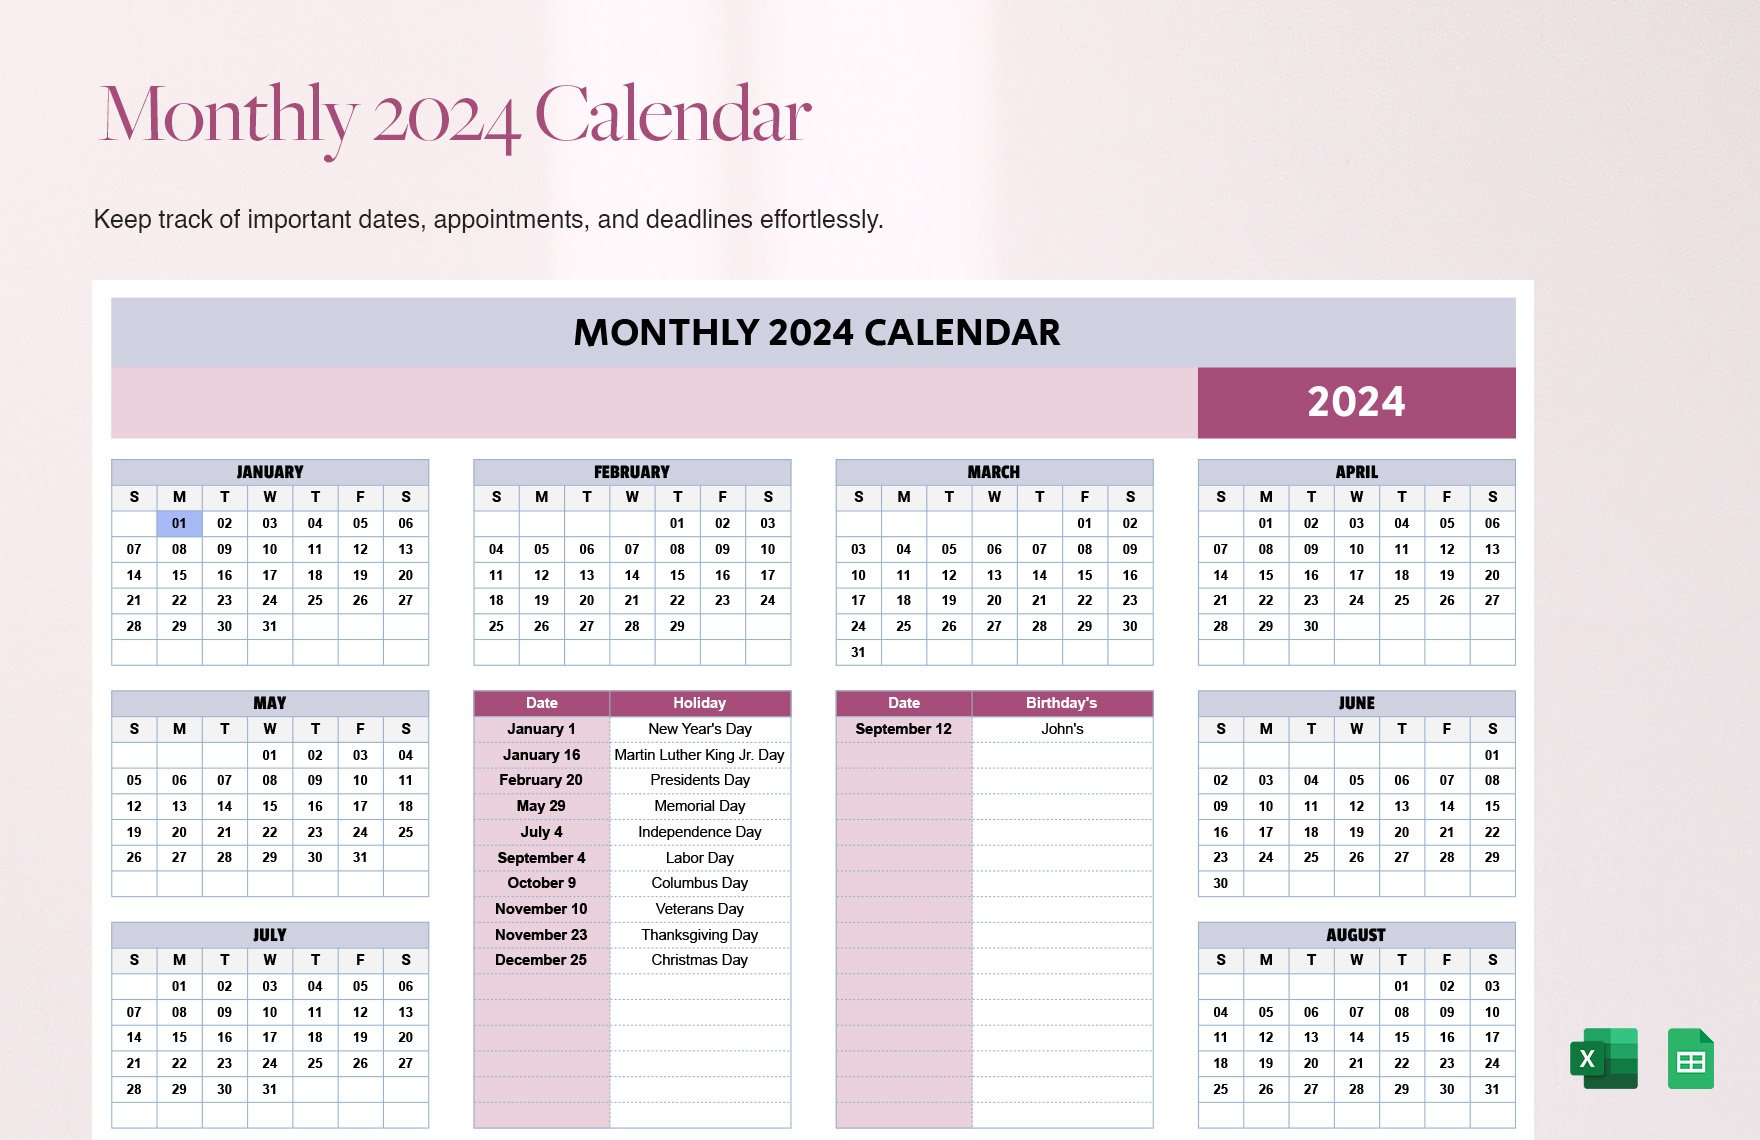 Free Monthly 2024 Calendar Template in Excel, Google Sheets